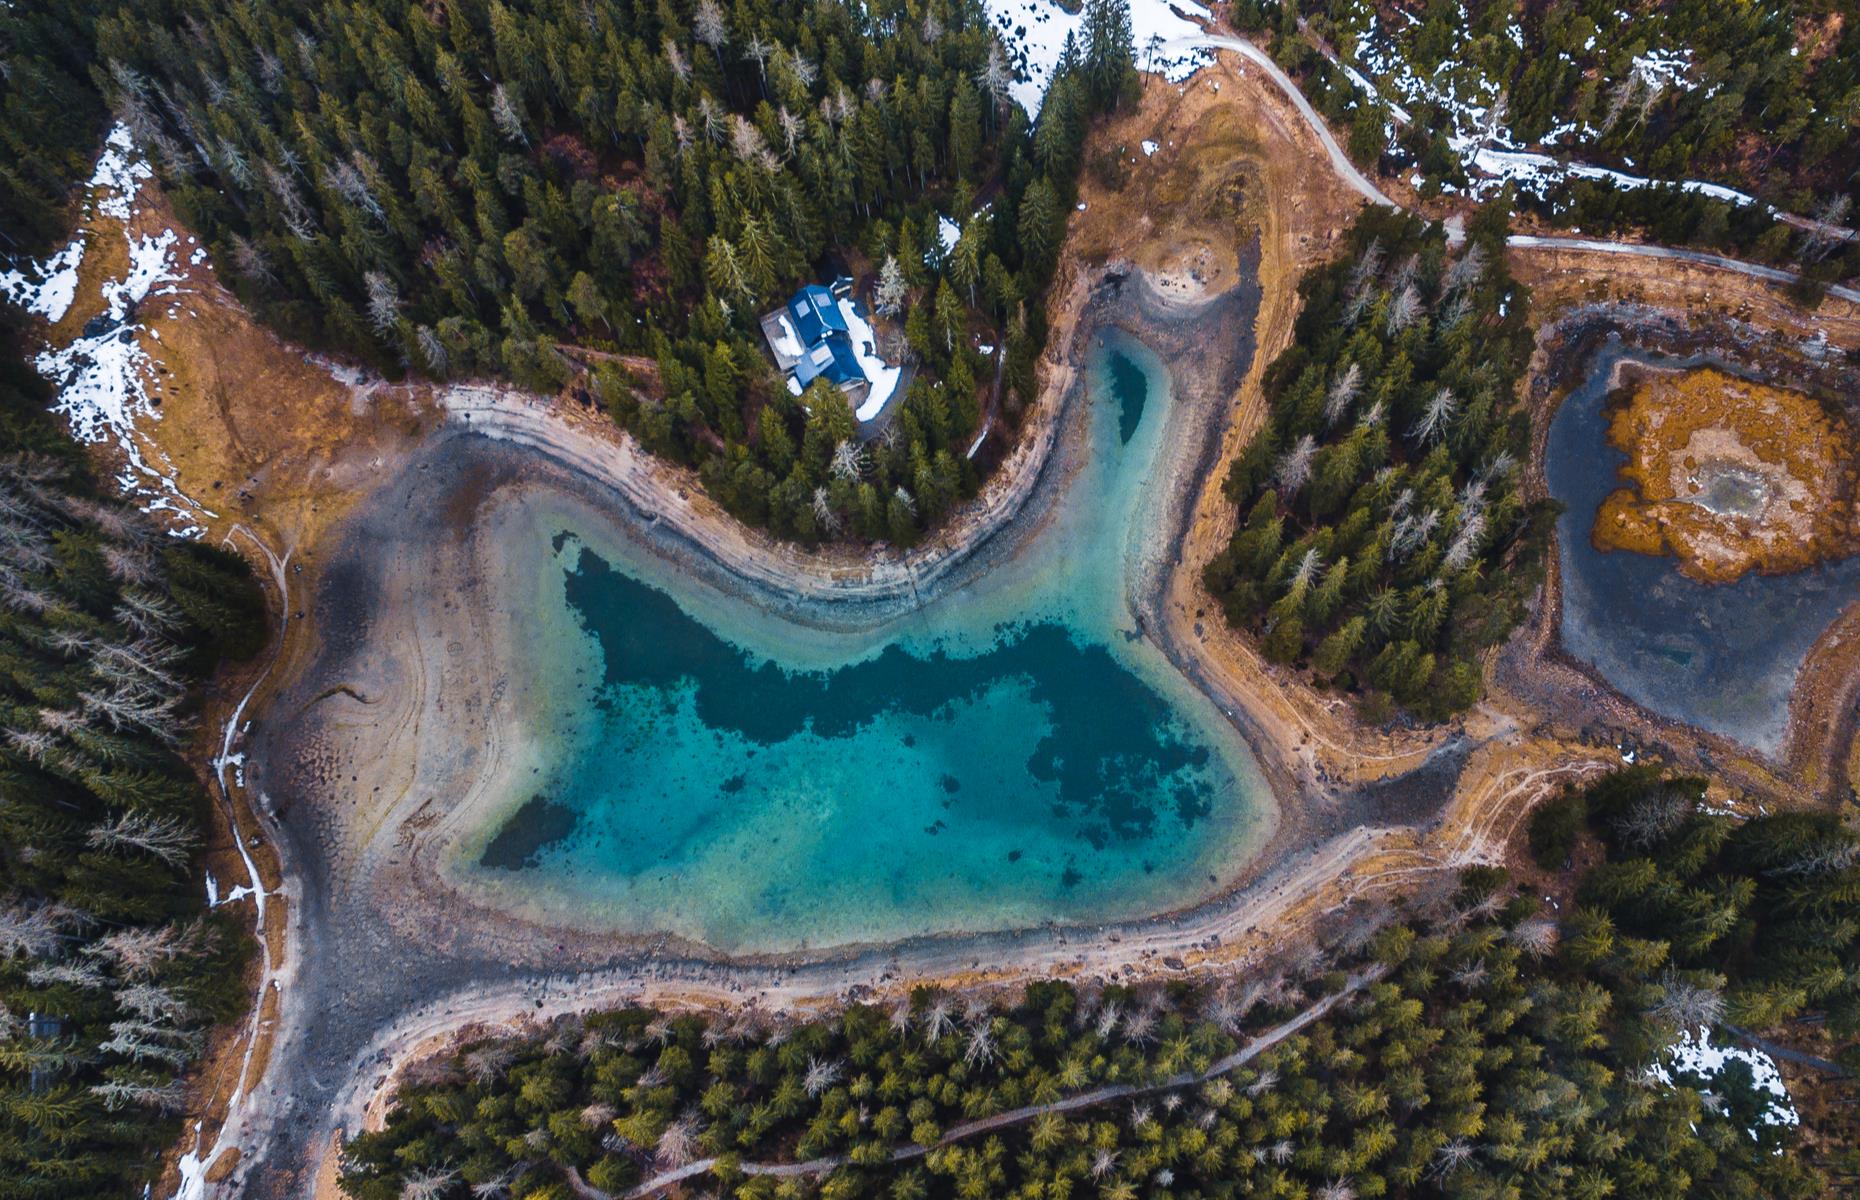 Living up to its name, Grüner See – meaning “Green Lake” in German – shows off its distinctive green-blue hue in this eye-catching drone shot. Located in the heart of Austria’s Hochschwab Mountains, the lake fills up with meltwater from the surrounding mountains by summer, while in winter the lake dramatically recedes to a depth of just 3ft 4in-6ft 7in (1 to 2m).